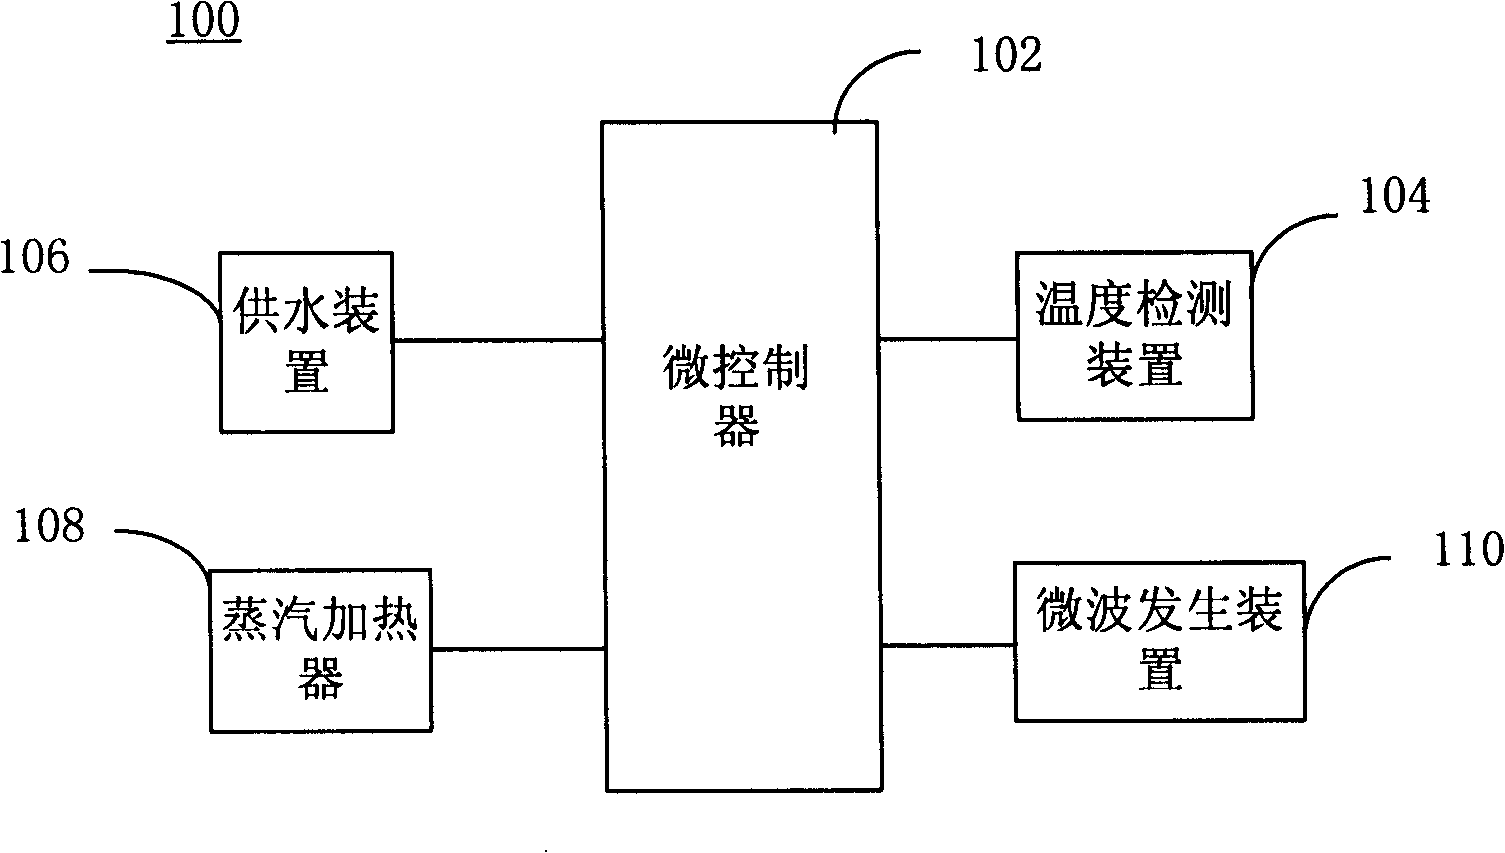 Water-feeding control method of steam microwave oven